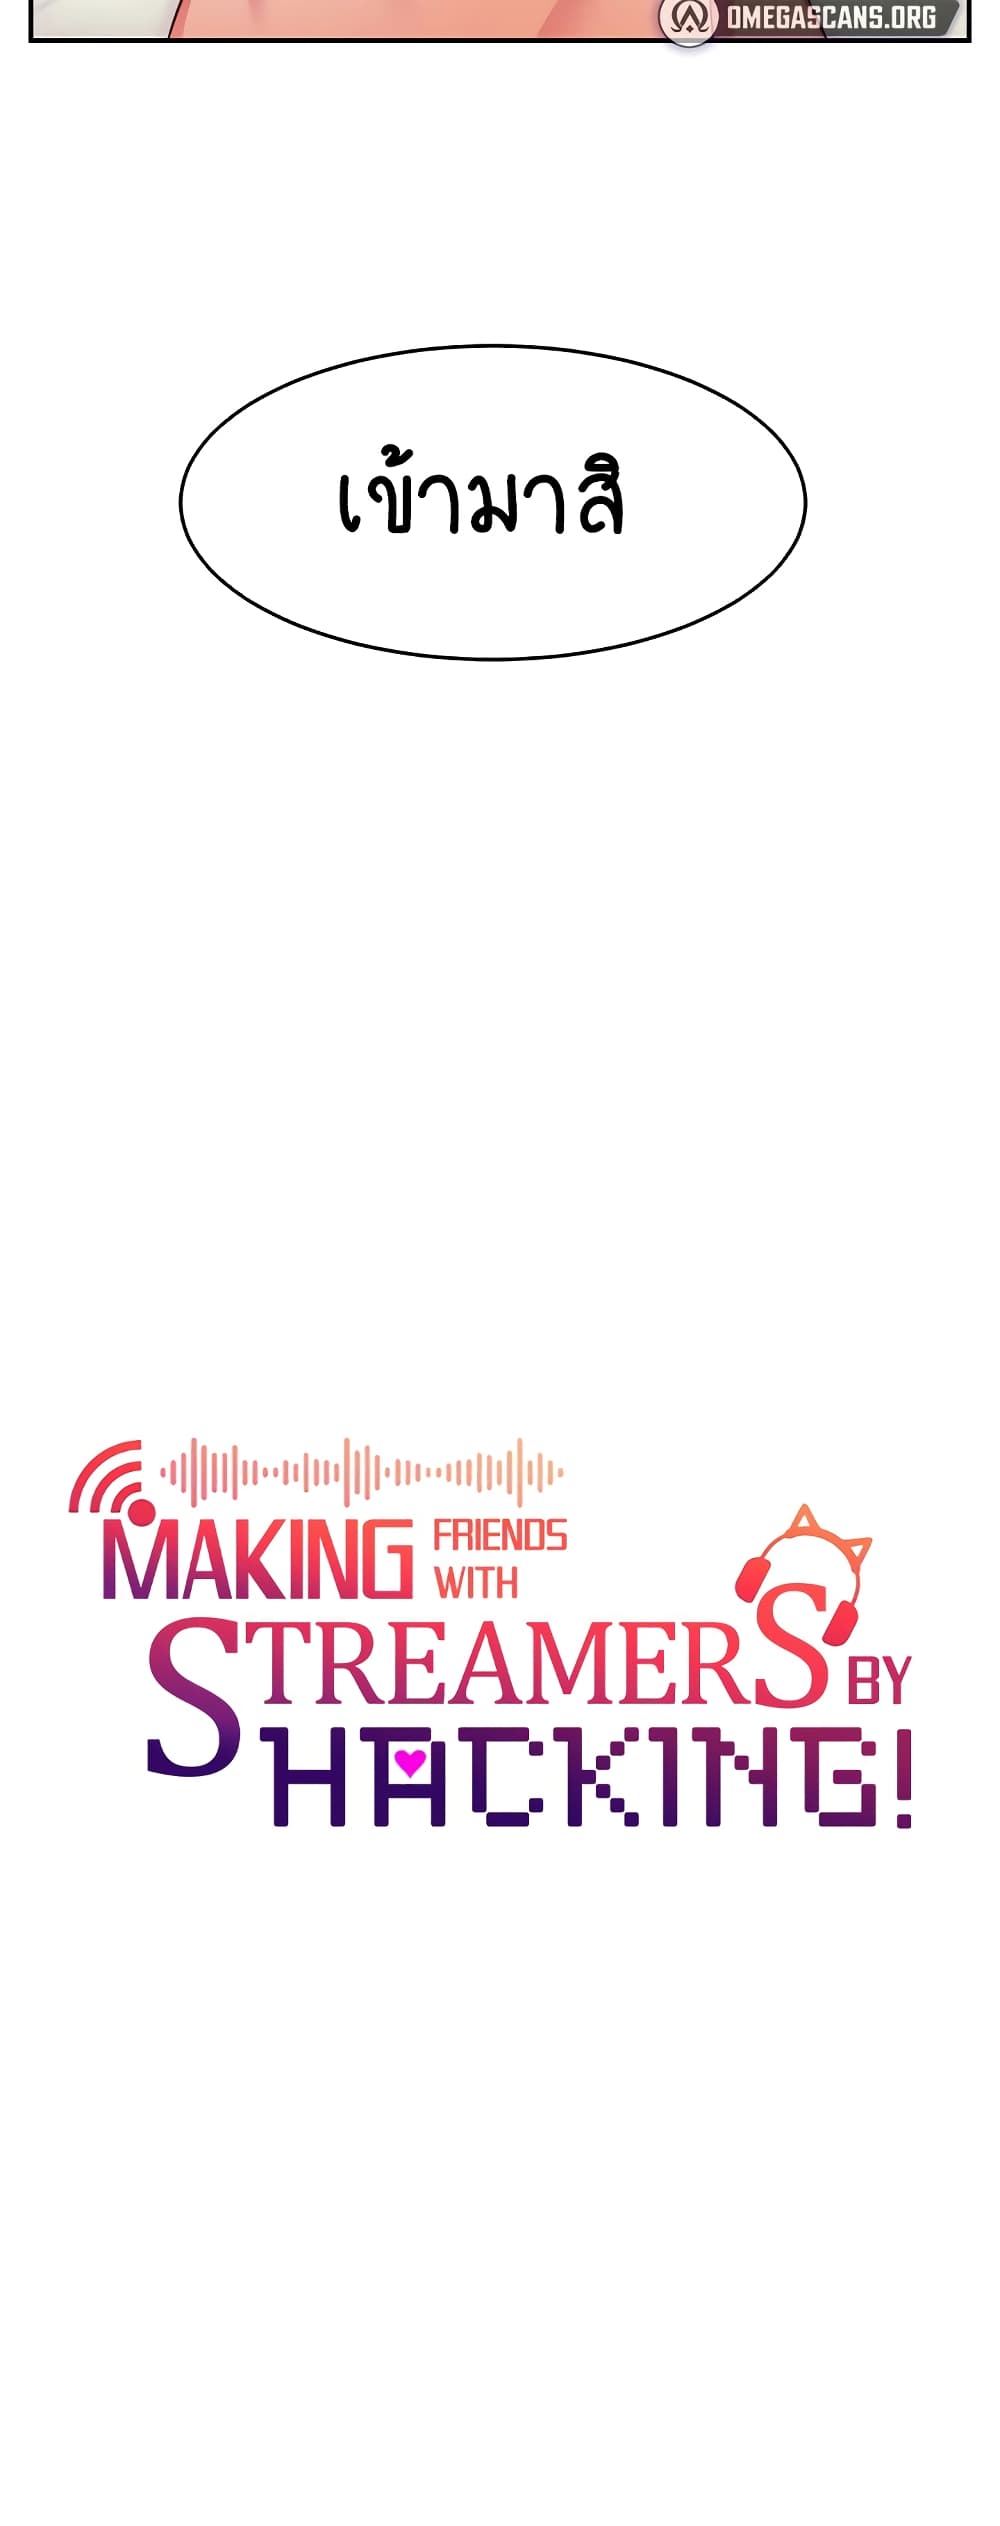 Making Friends With Streamers by Hacking! 11-11